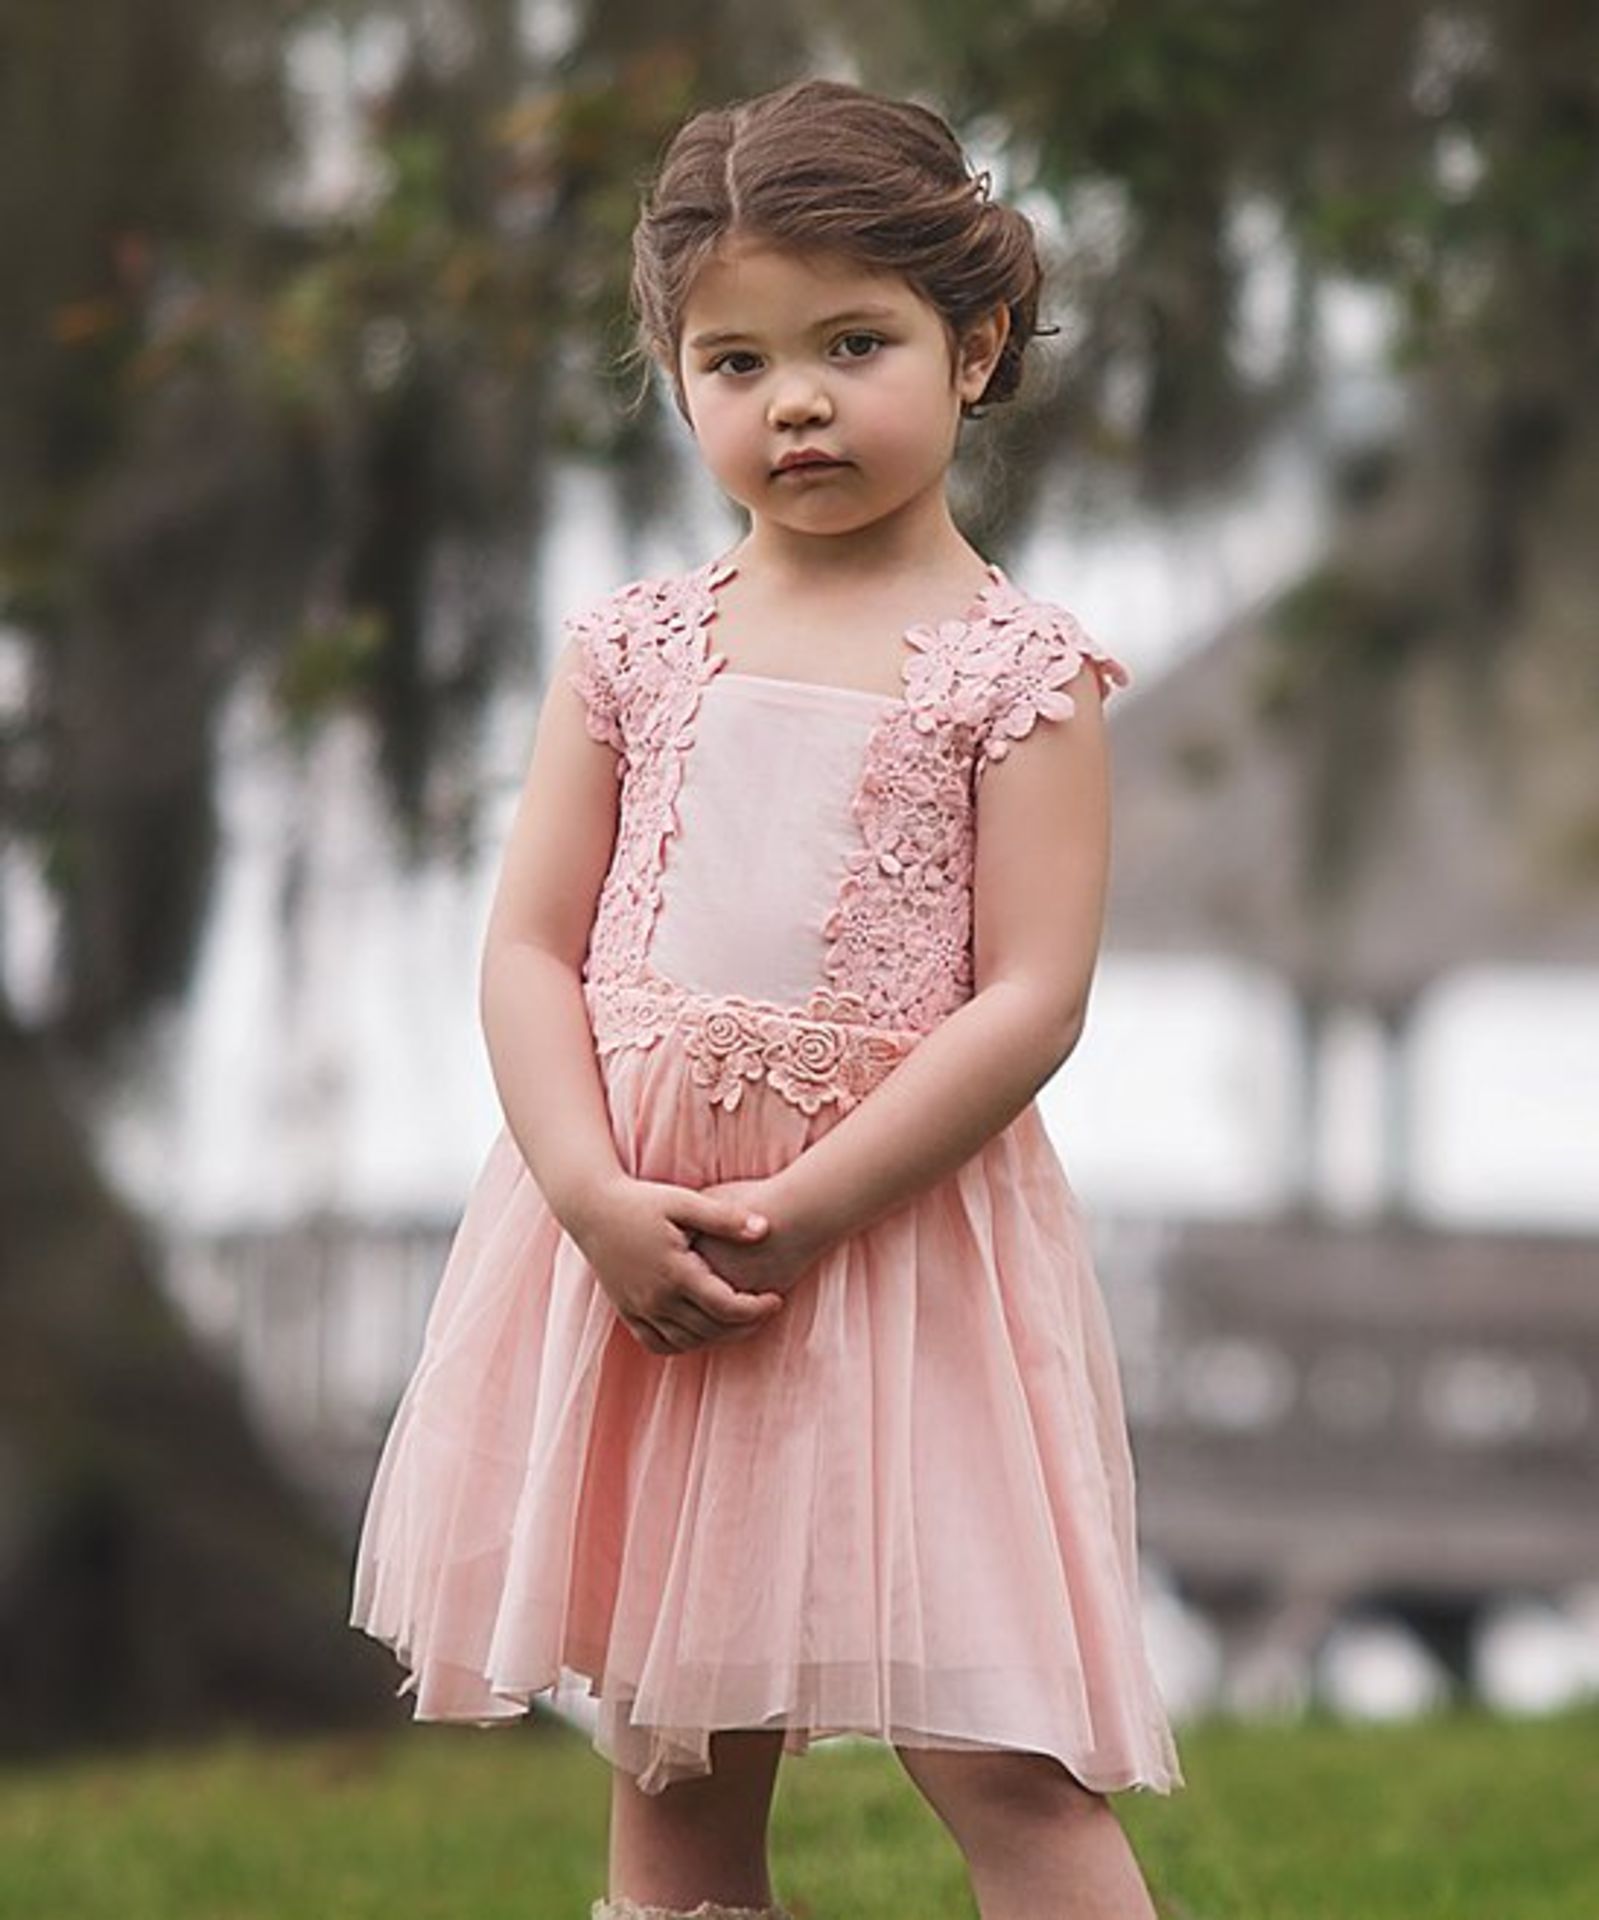 Blush Lace Accent A-Line Dress - Infant, Toddler & Girls